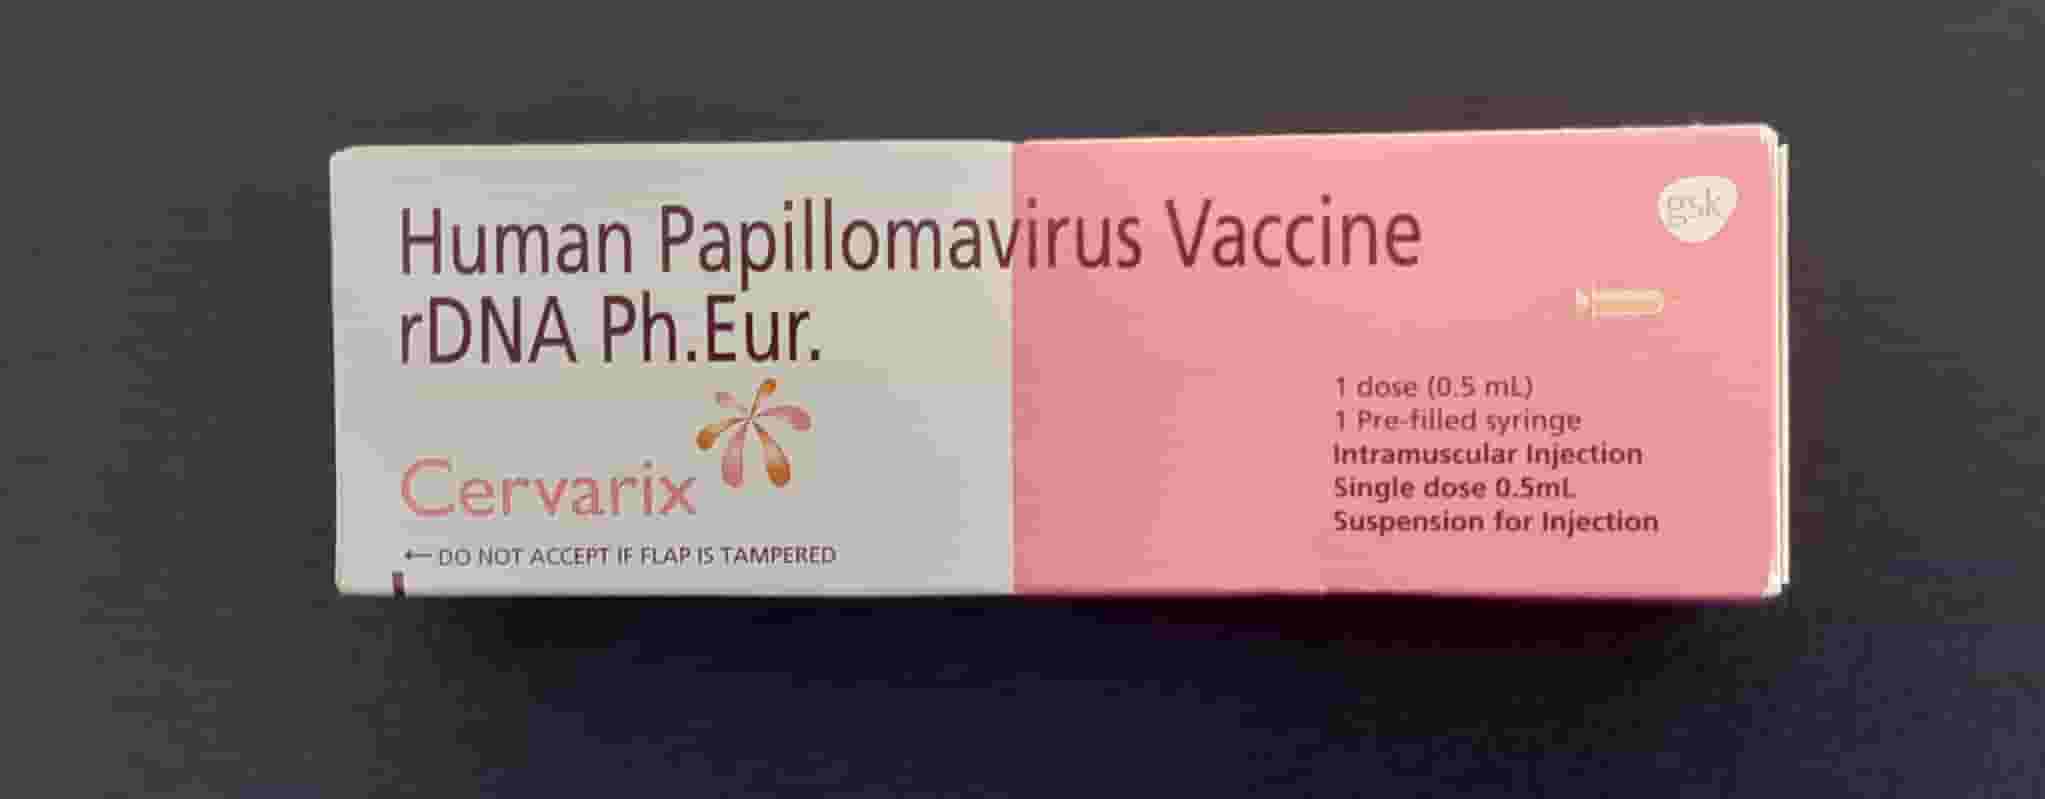 Cervarix is bivalent inactivated HPV vaccine given at age above 9 years 2 or 3 doses to prevent HPV infection which causes cervical cancer